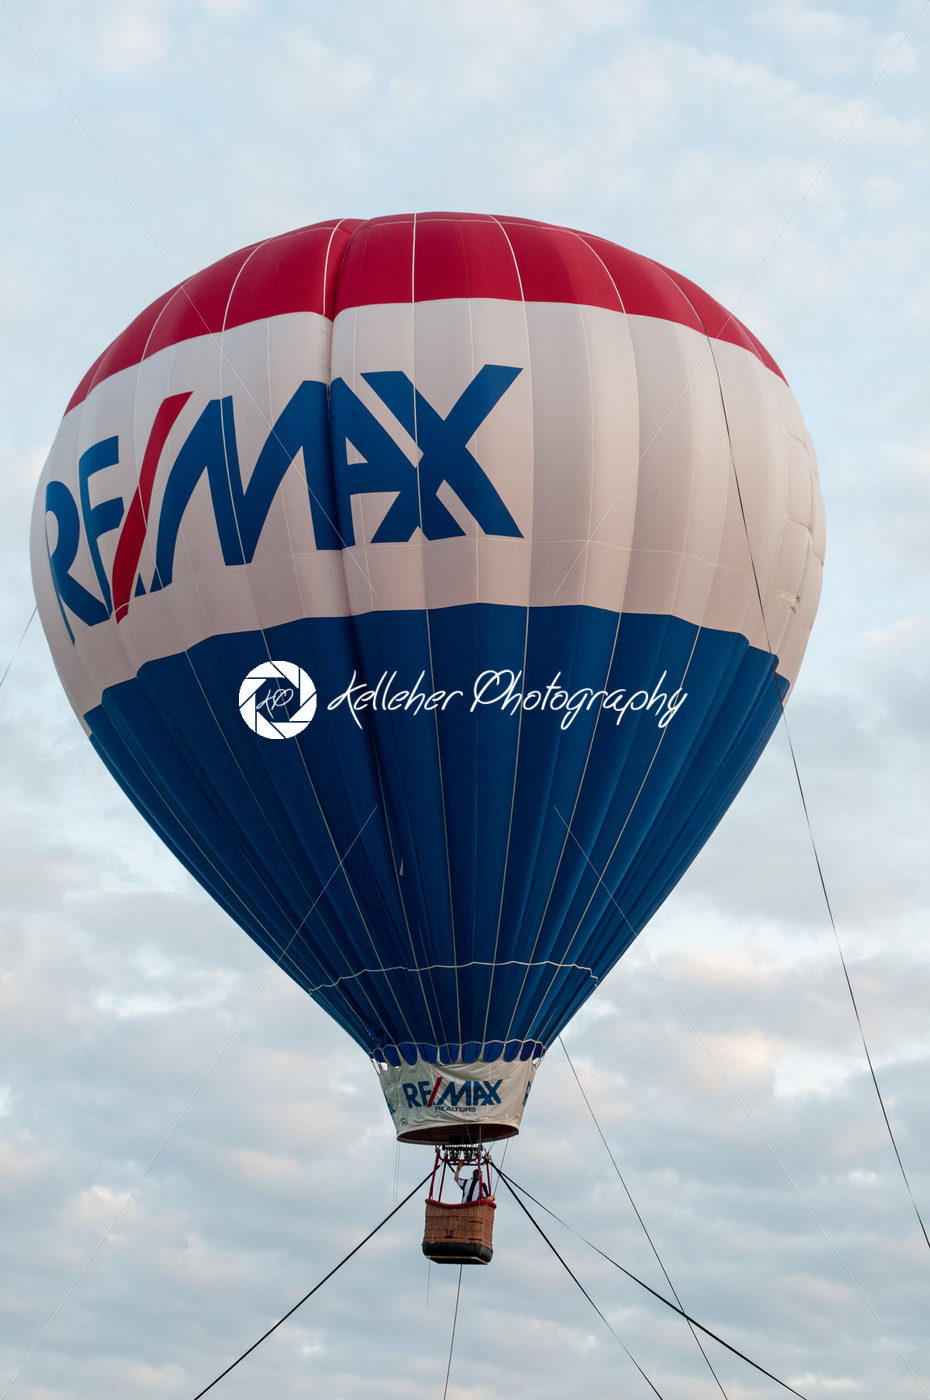 EAST GOSHEN, PA – JUNE 21: The Remax balloon floating at East Goshen Day on June 21, 2014 - Kelleher Photography Store